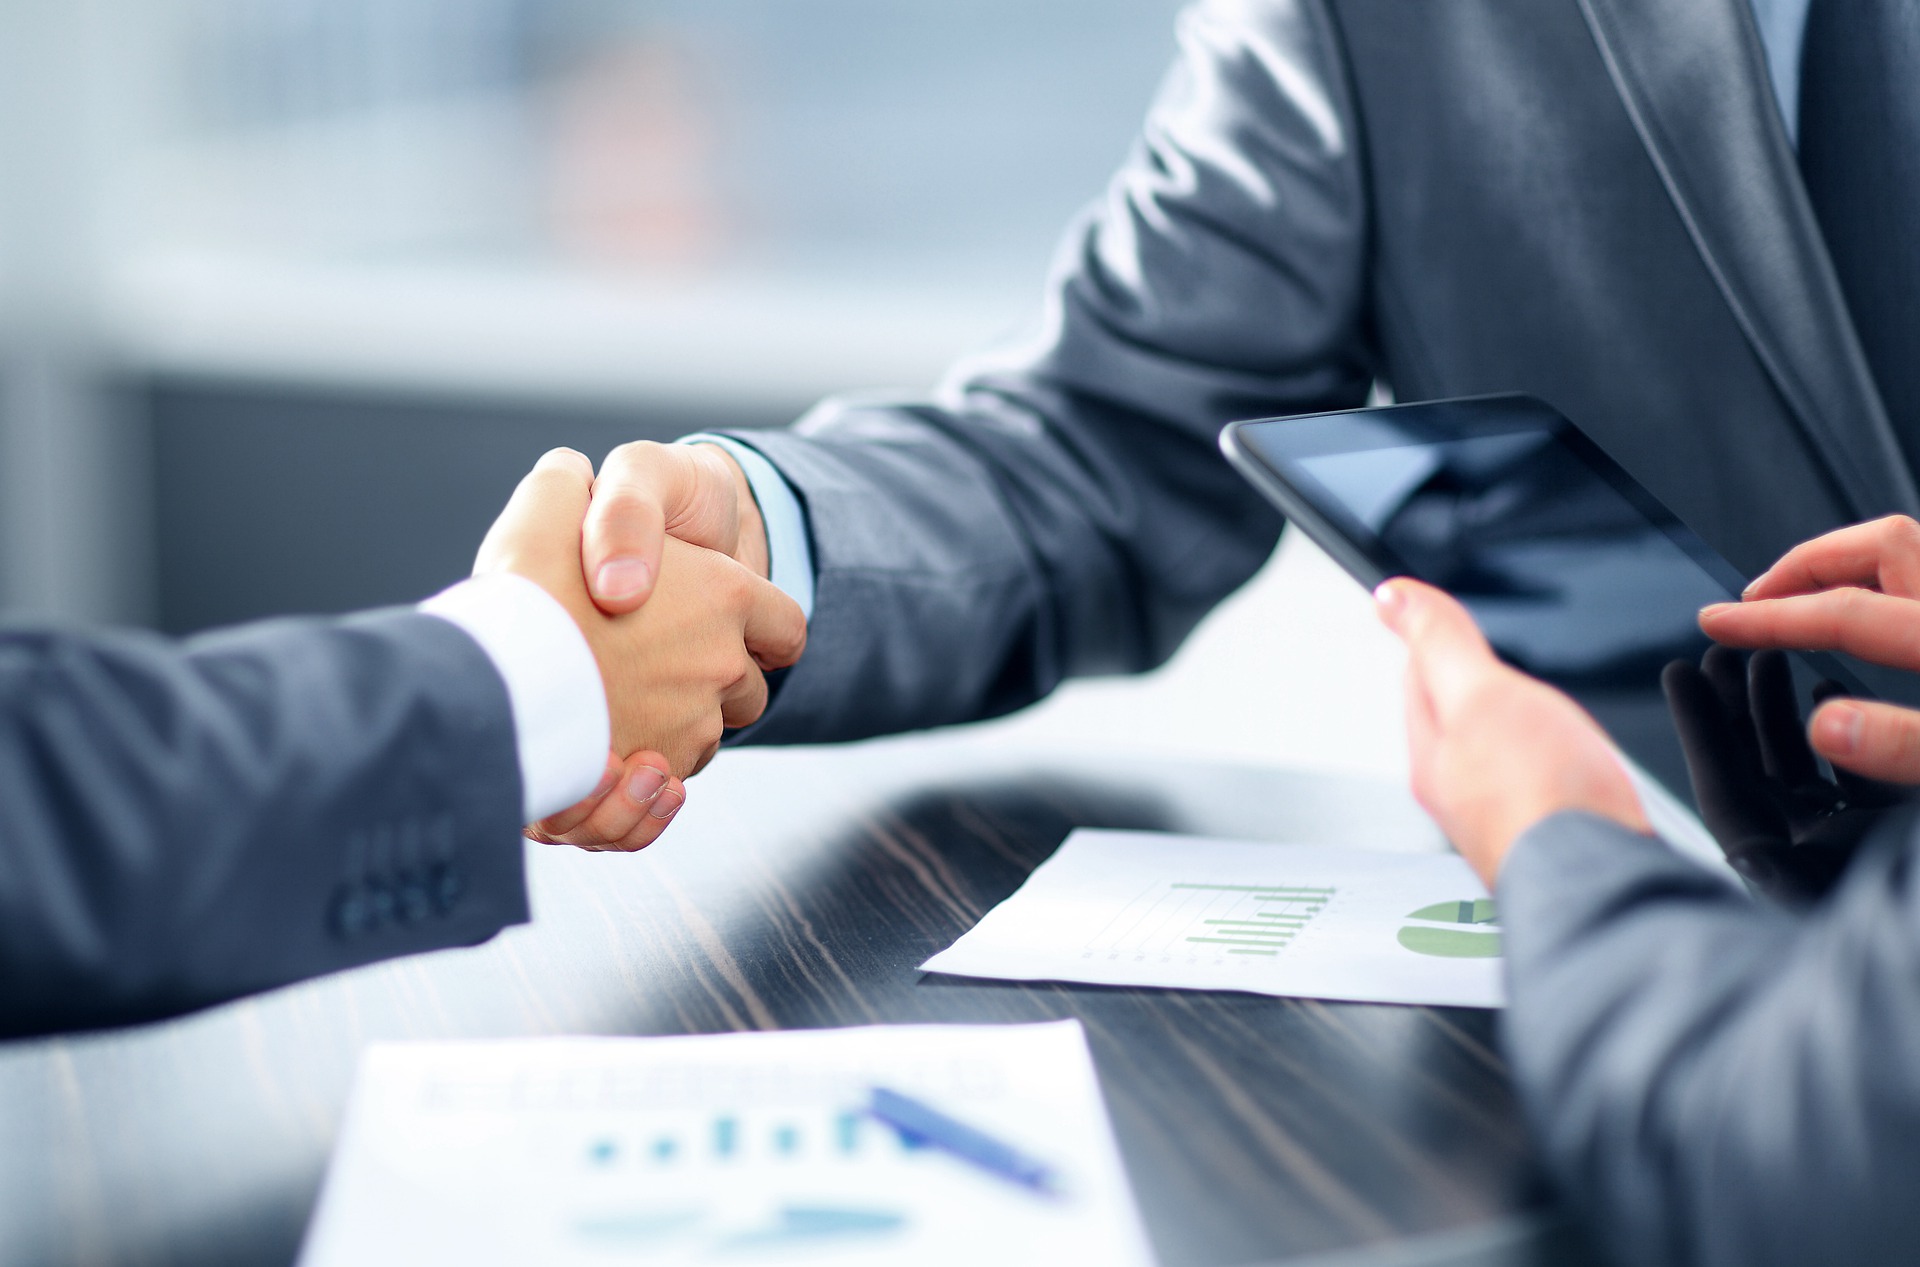 Two people shaking hands over paperwork